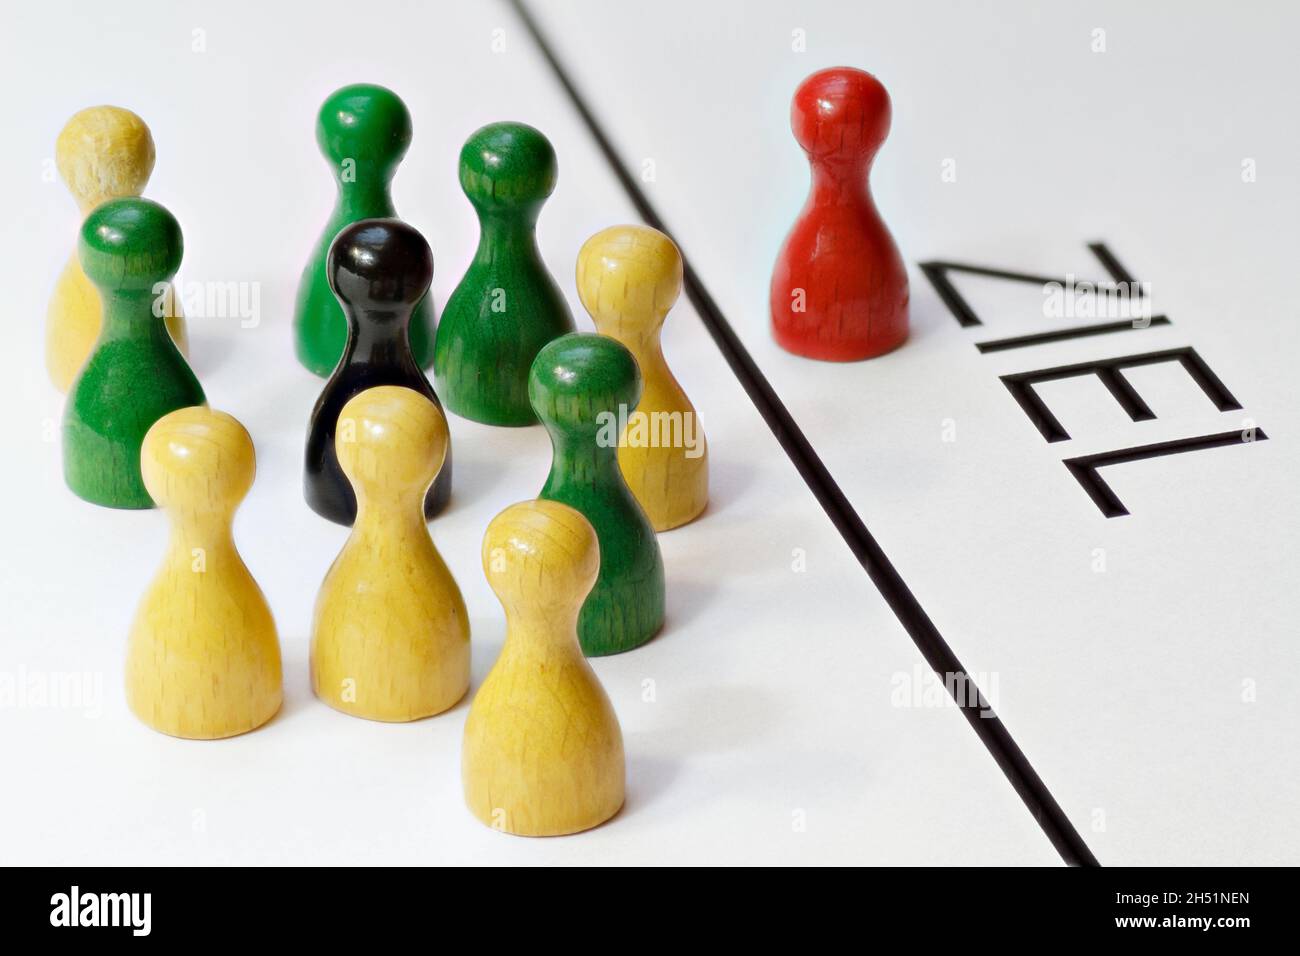 Game pieces in red, green, yellow and black. Are competing to achieve a goal. The German word for target 'Ziel' is written on the pad Stock Photo